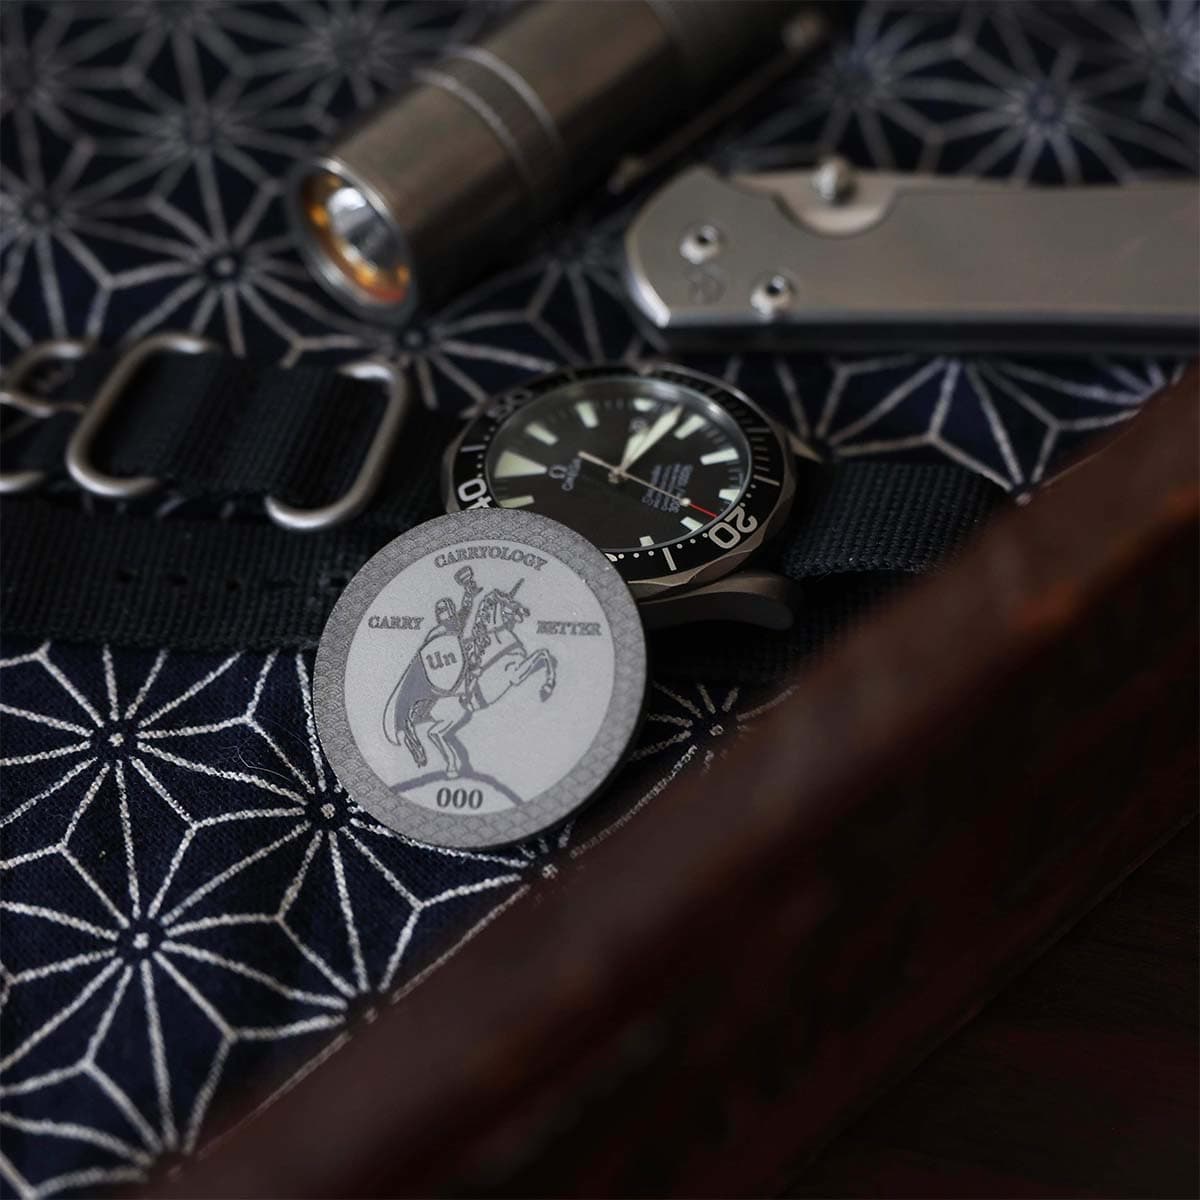 Carryology Community Challenge Coin Carryology Coin Suburban.